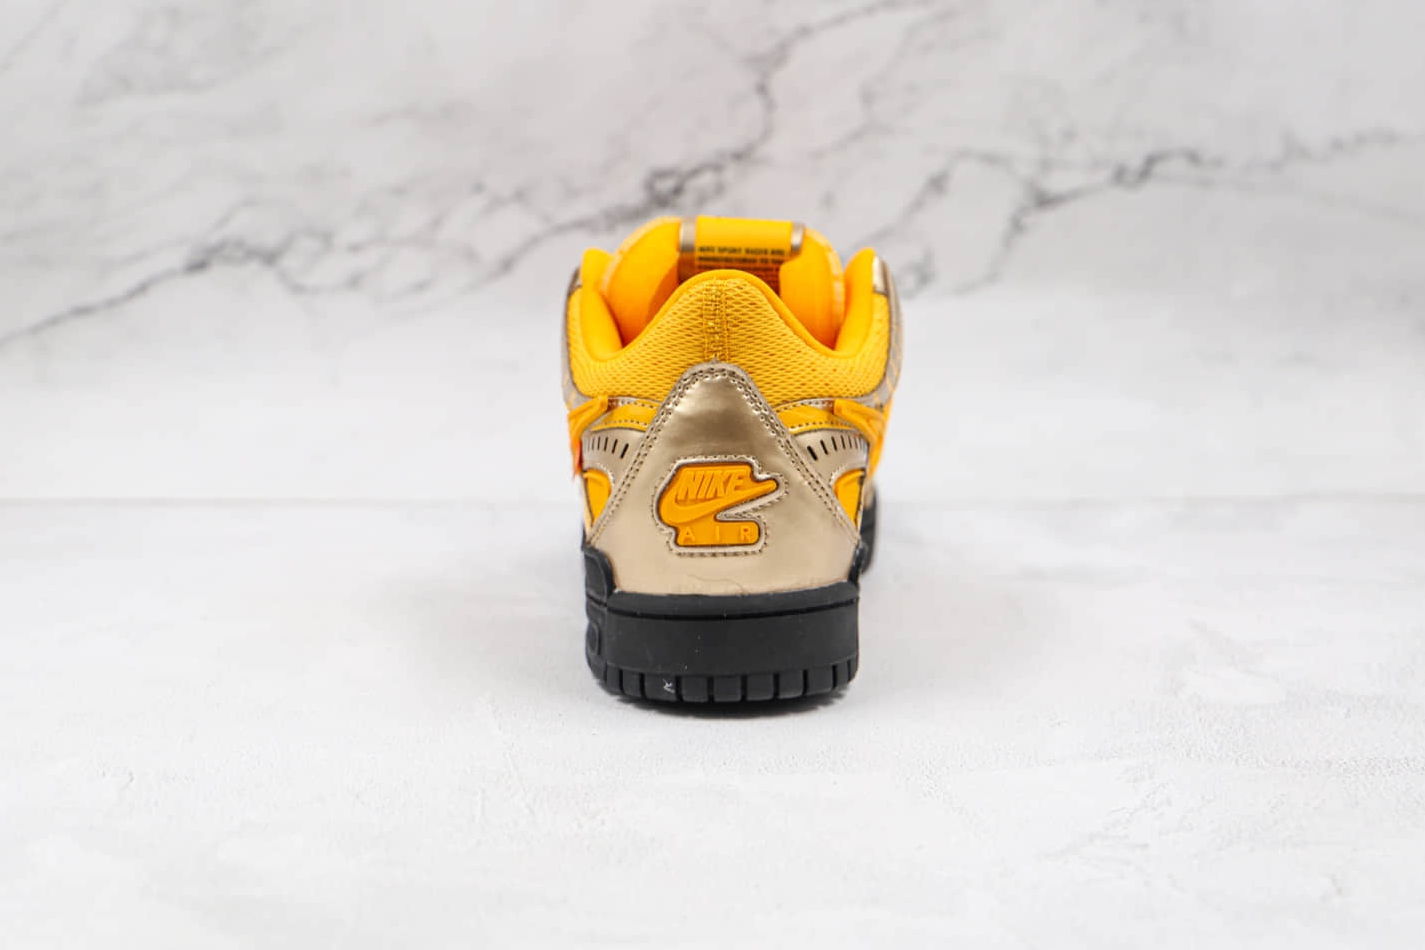 Nike Off-White x Air Rubber Dunk 'University Gold' CU6015-700 - Limited Edition Sneakers